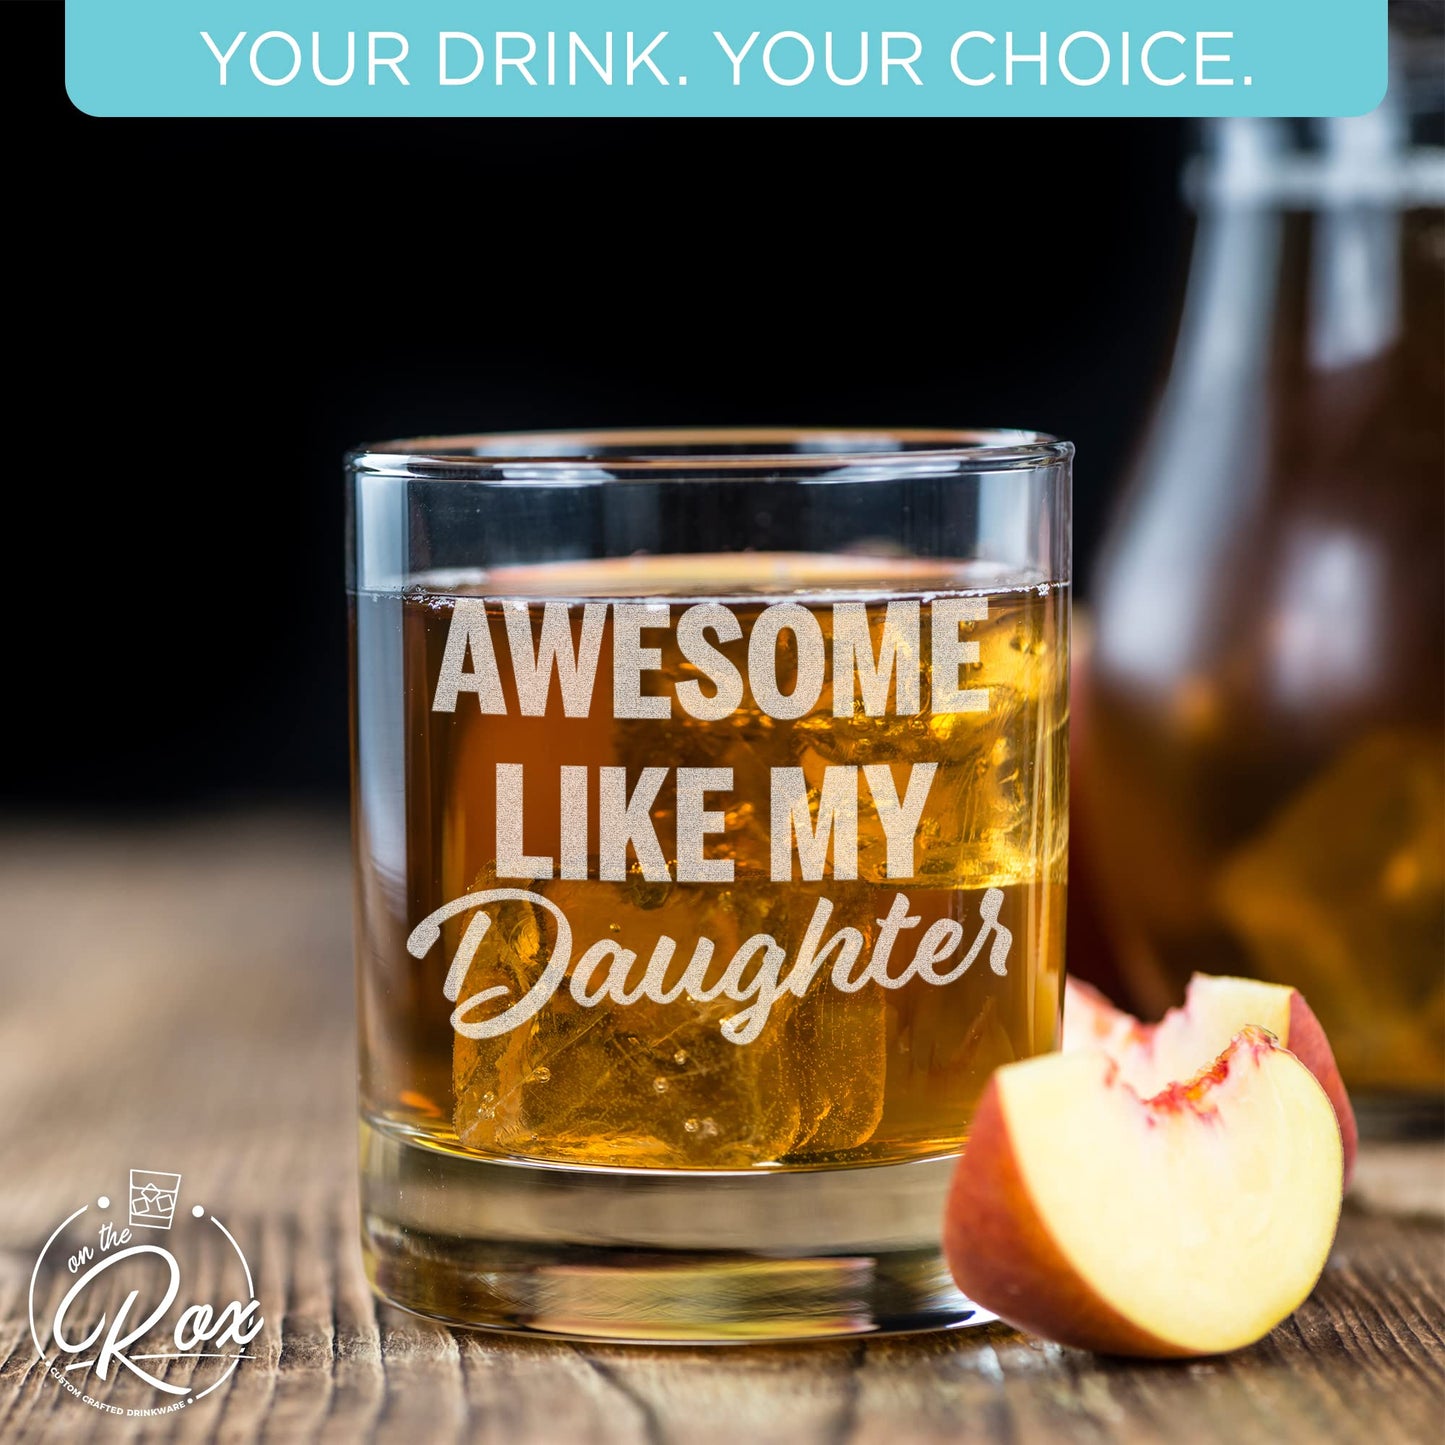 Whiskey Gifts for Dad- 11 Oz "Awesome Like My Daugther" Engraved Whiskey Glass - Father's Day Gifts, Dad Birthday Gifts From Daughter, Wife or Son - Dad Bourbon Glass - 6 Designs To Choose From